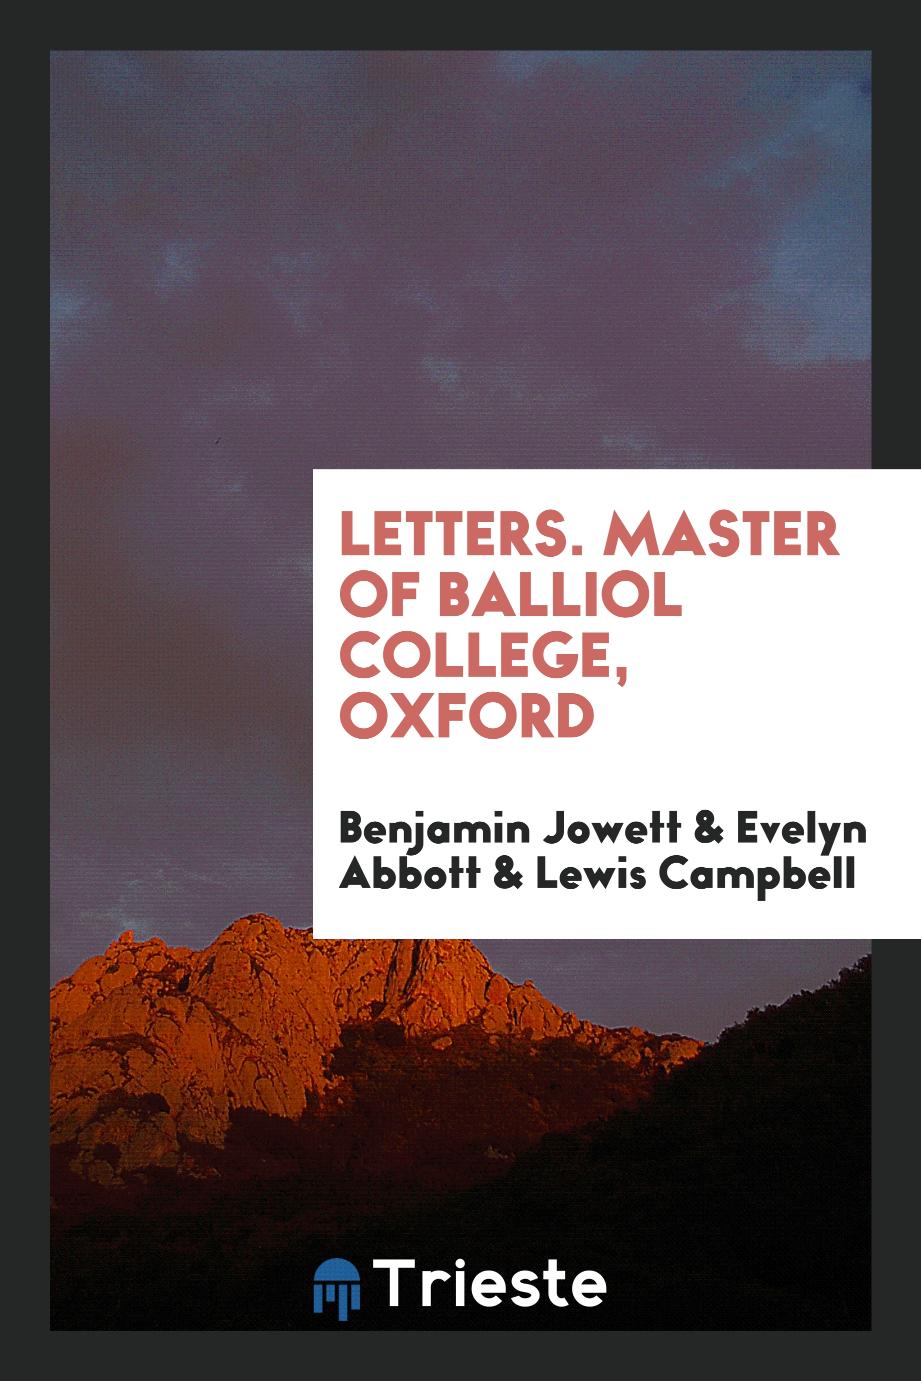 Letters. Master of Balliol college, Oxford